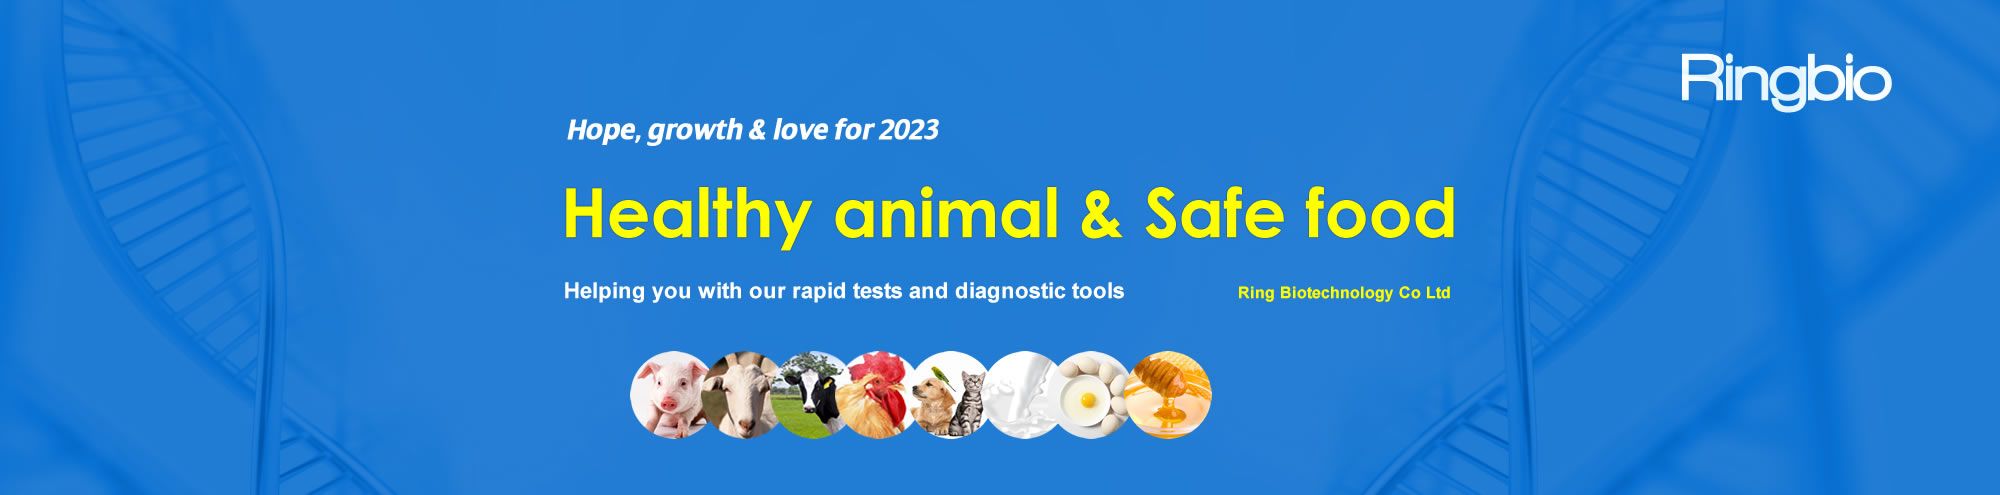 Healthy animal and safe food in 2023